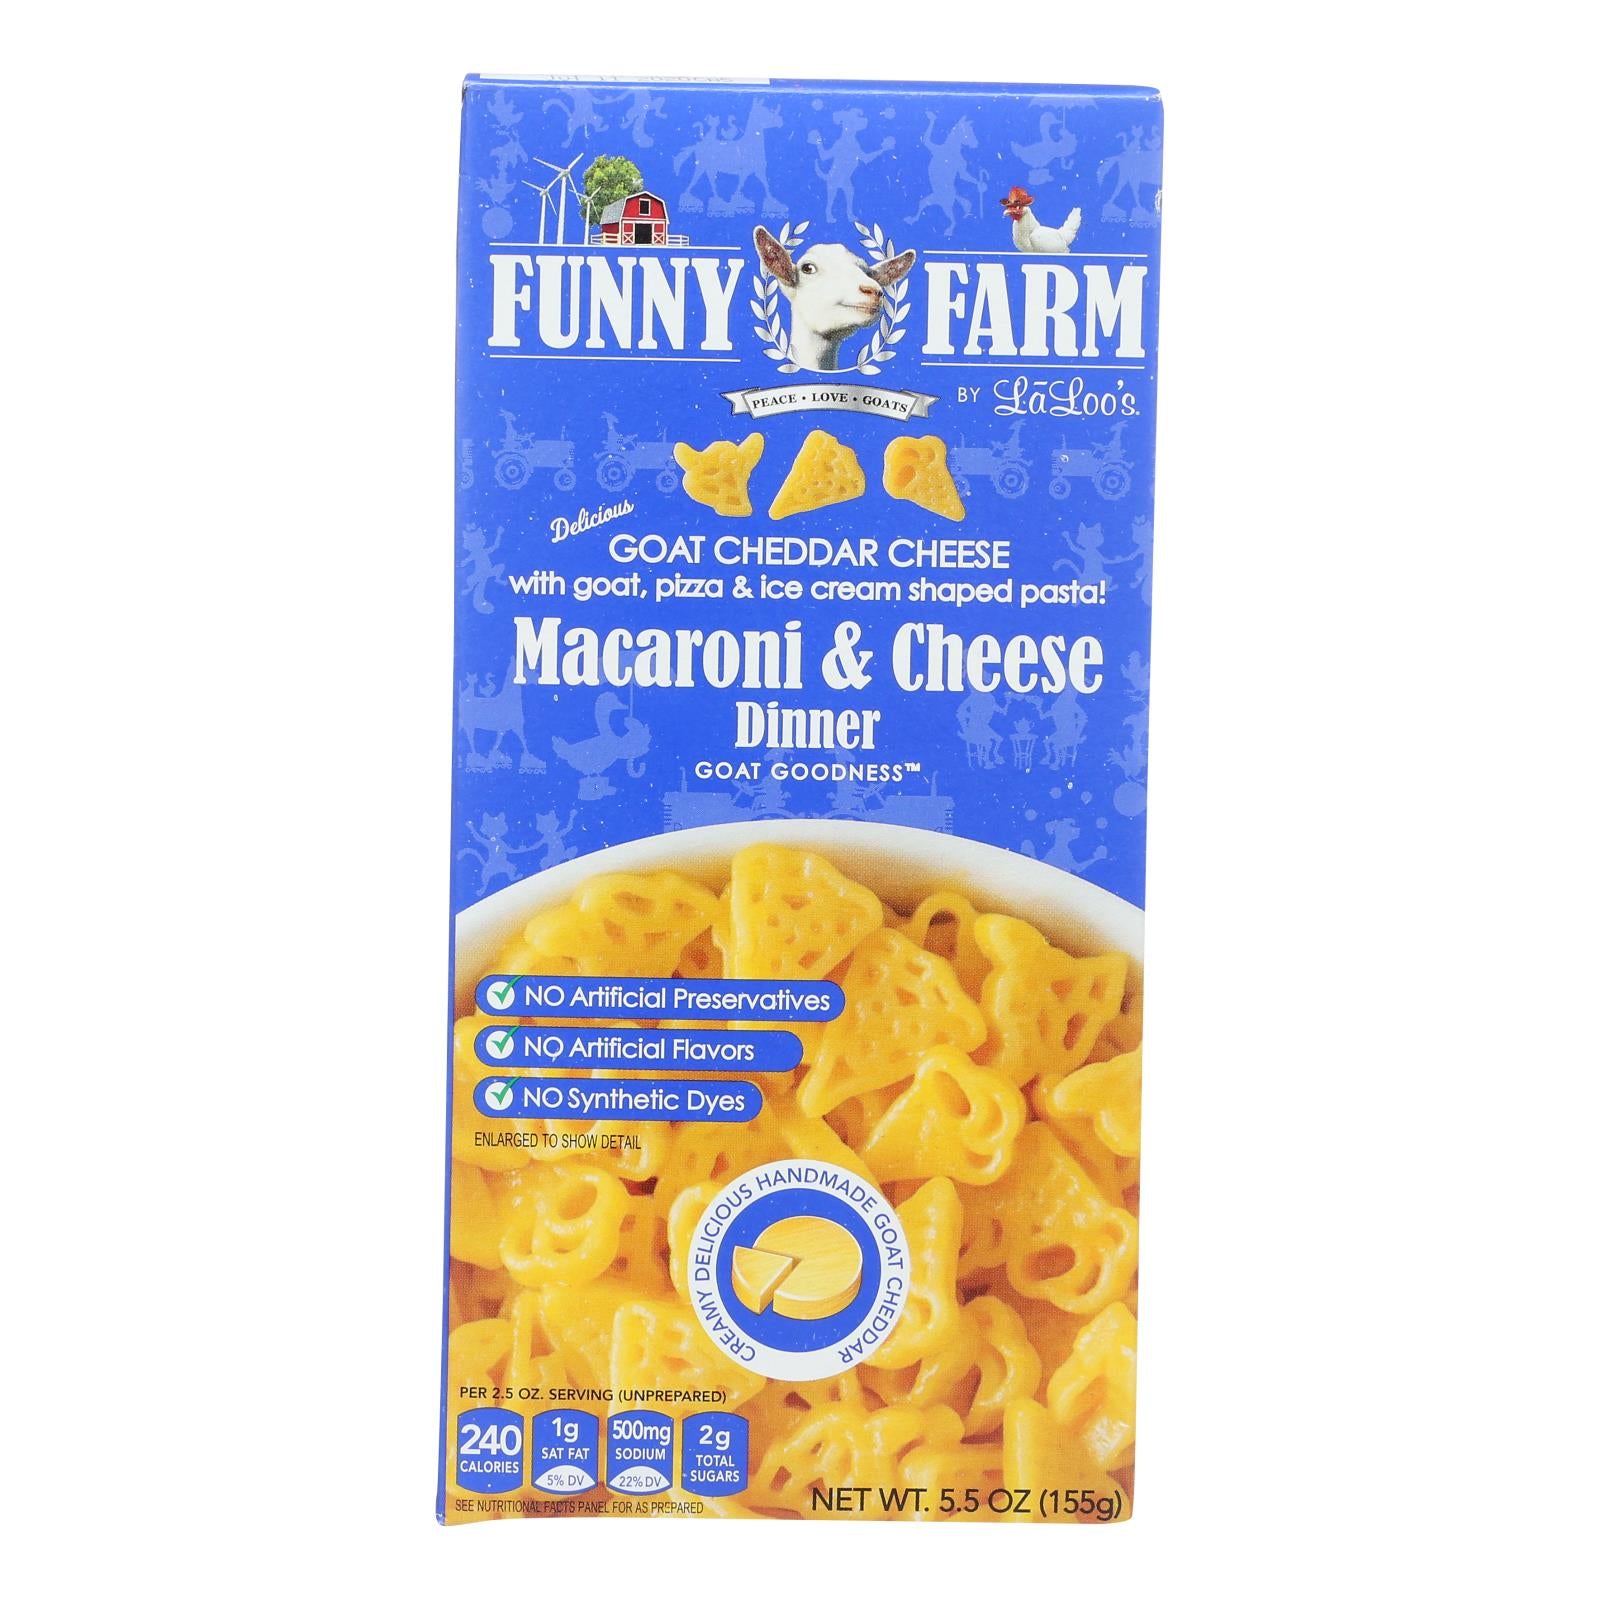 Funny Farm Goat Cheddar Cheese Macaroni & Cheese Dinner  - Case Of 8 - 5.5 Oz